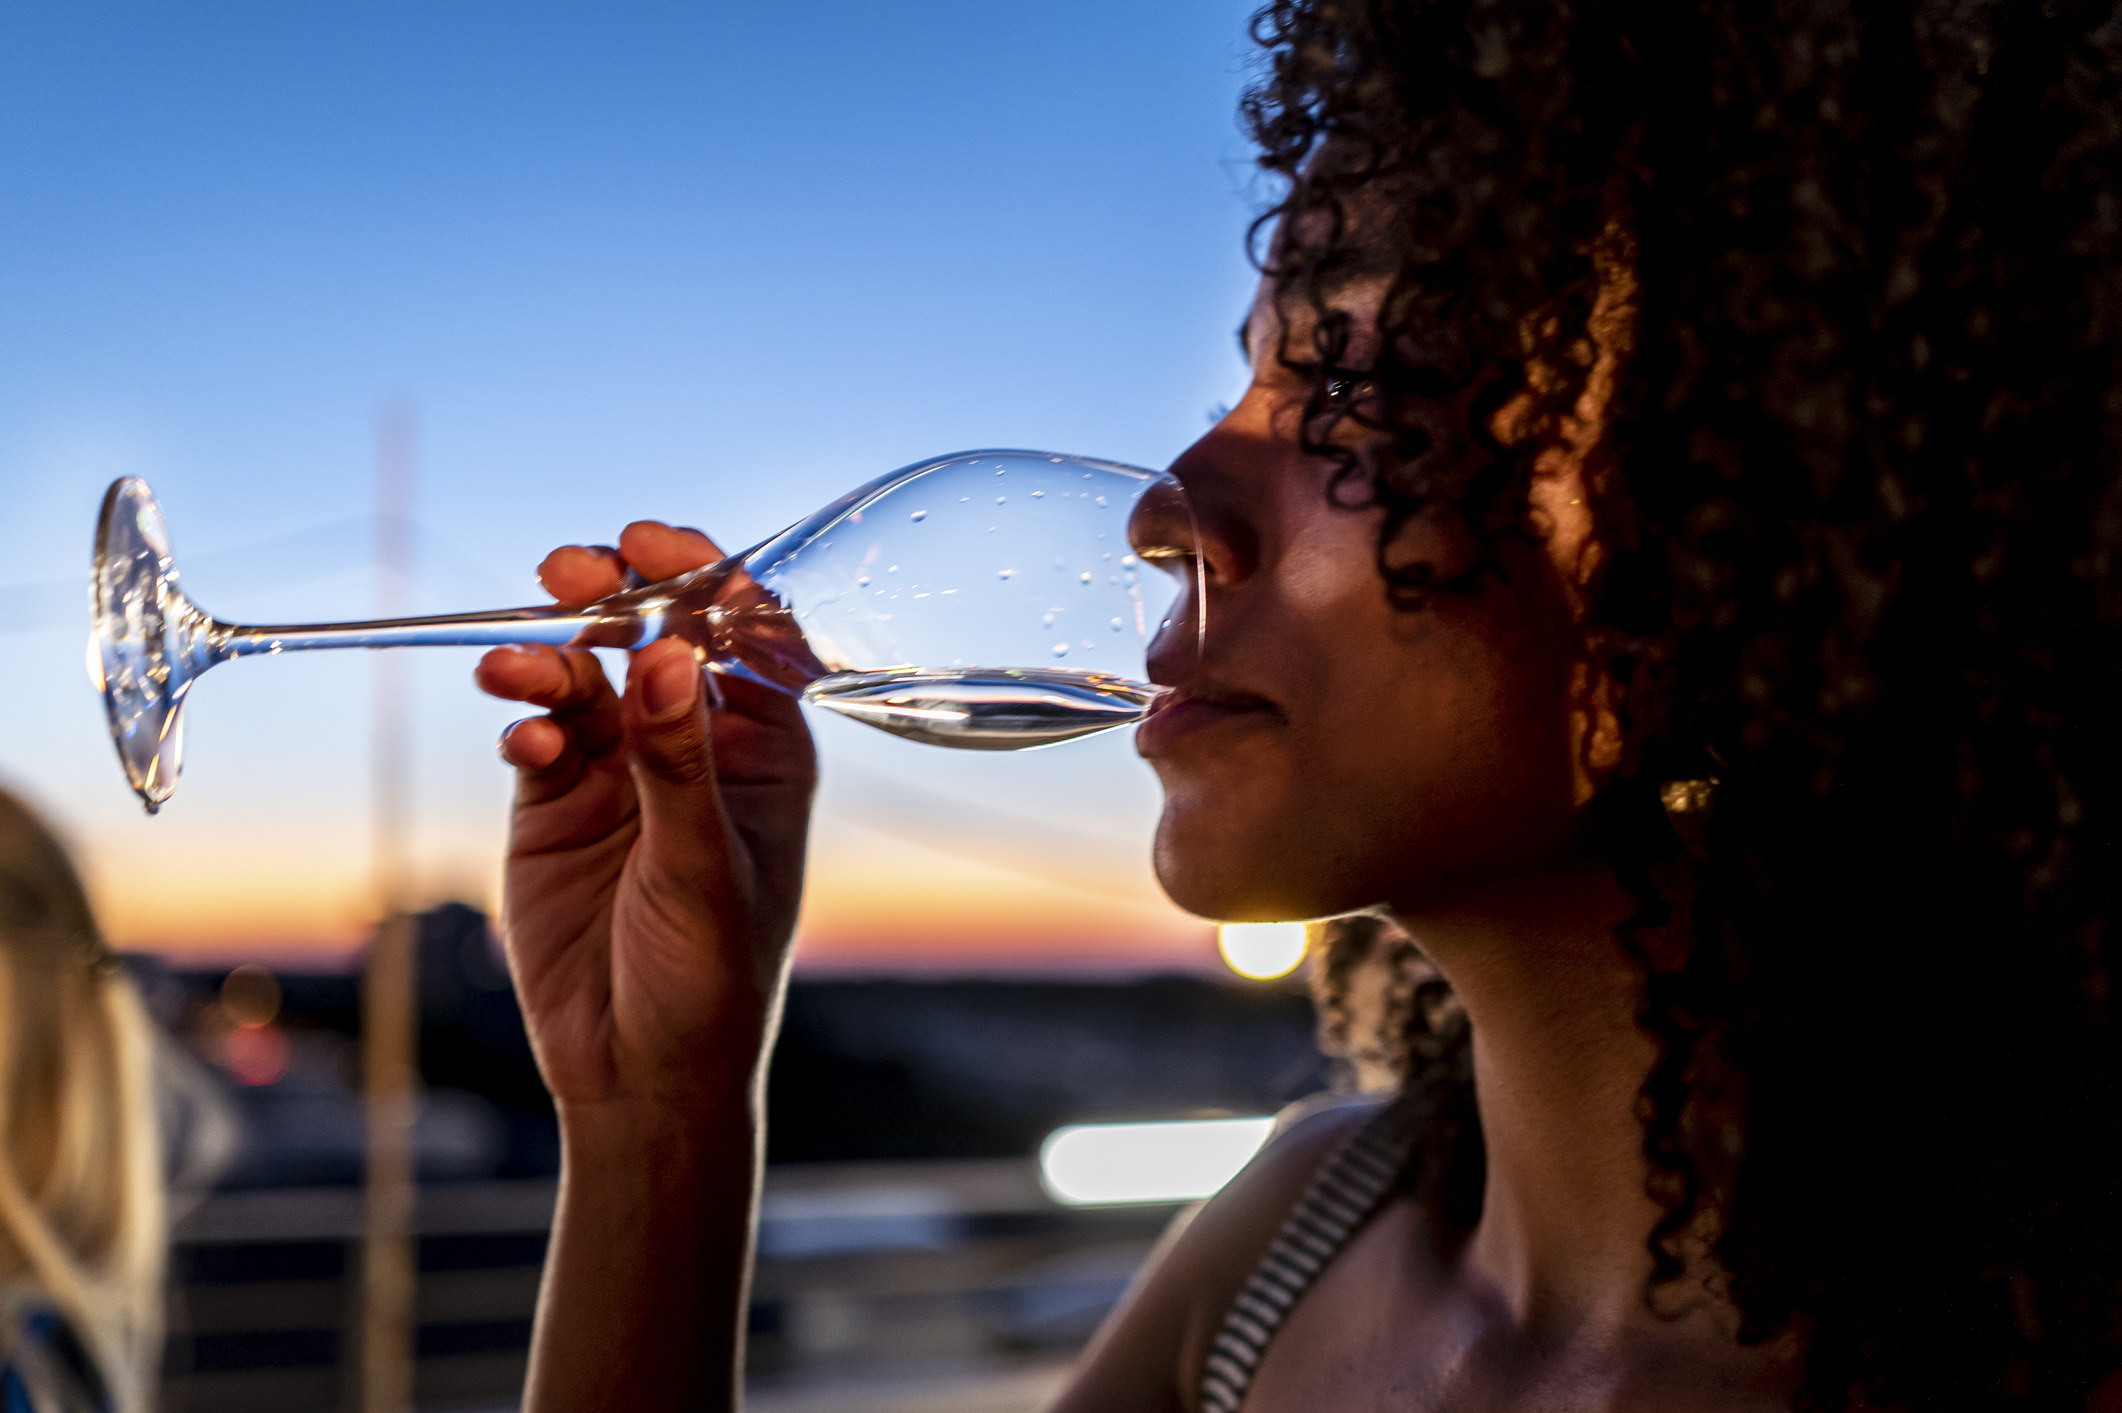 A woman drinking from a wine glass